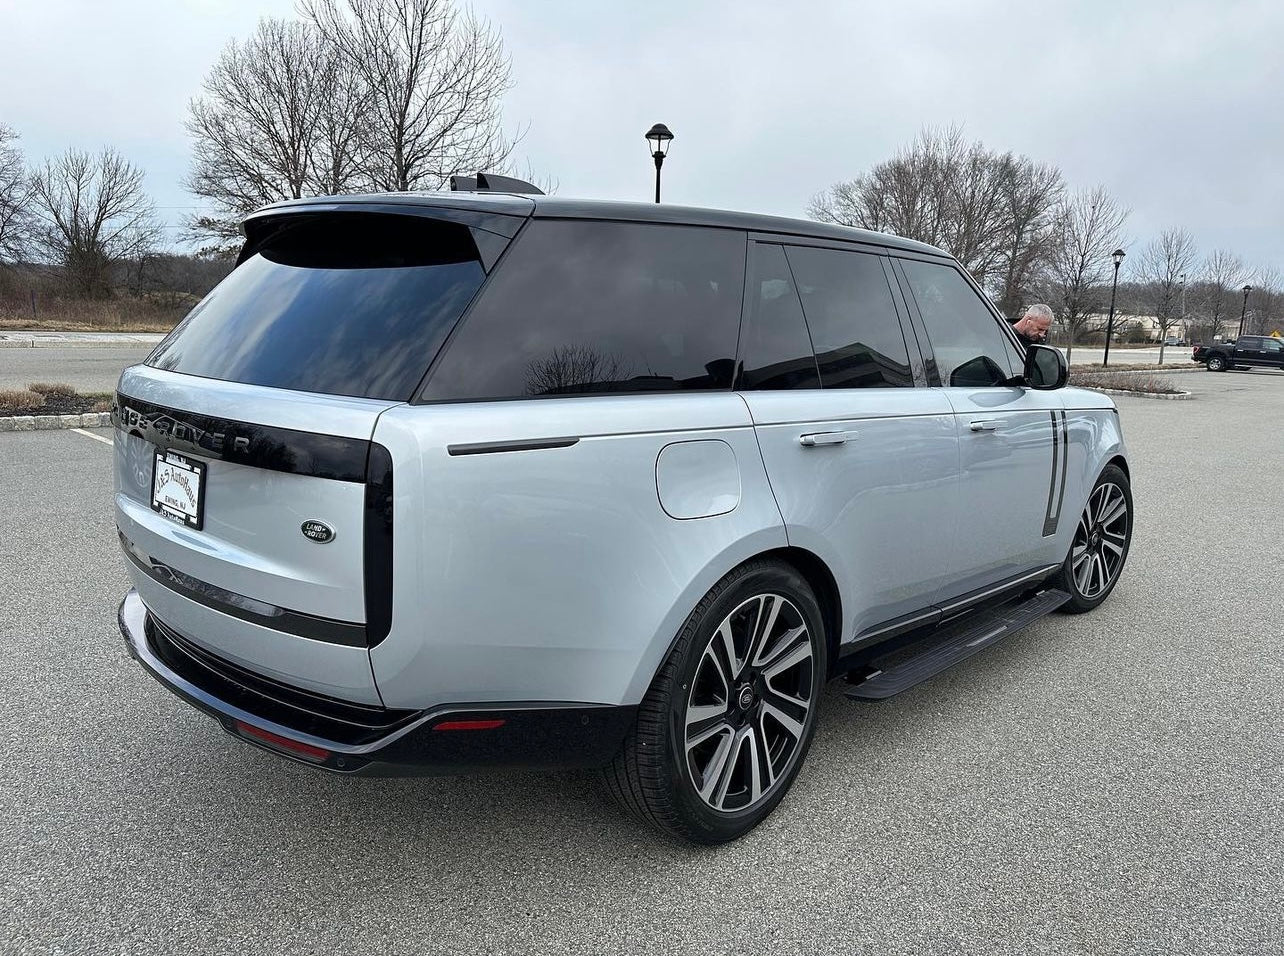 2023 LAND ROVER RANGE ROVER BIG BODY $0 Down Lease Driveway Delivery!